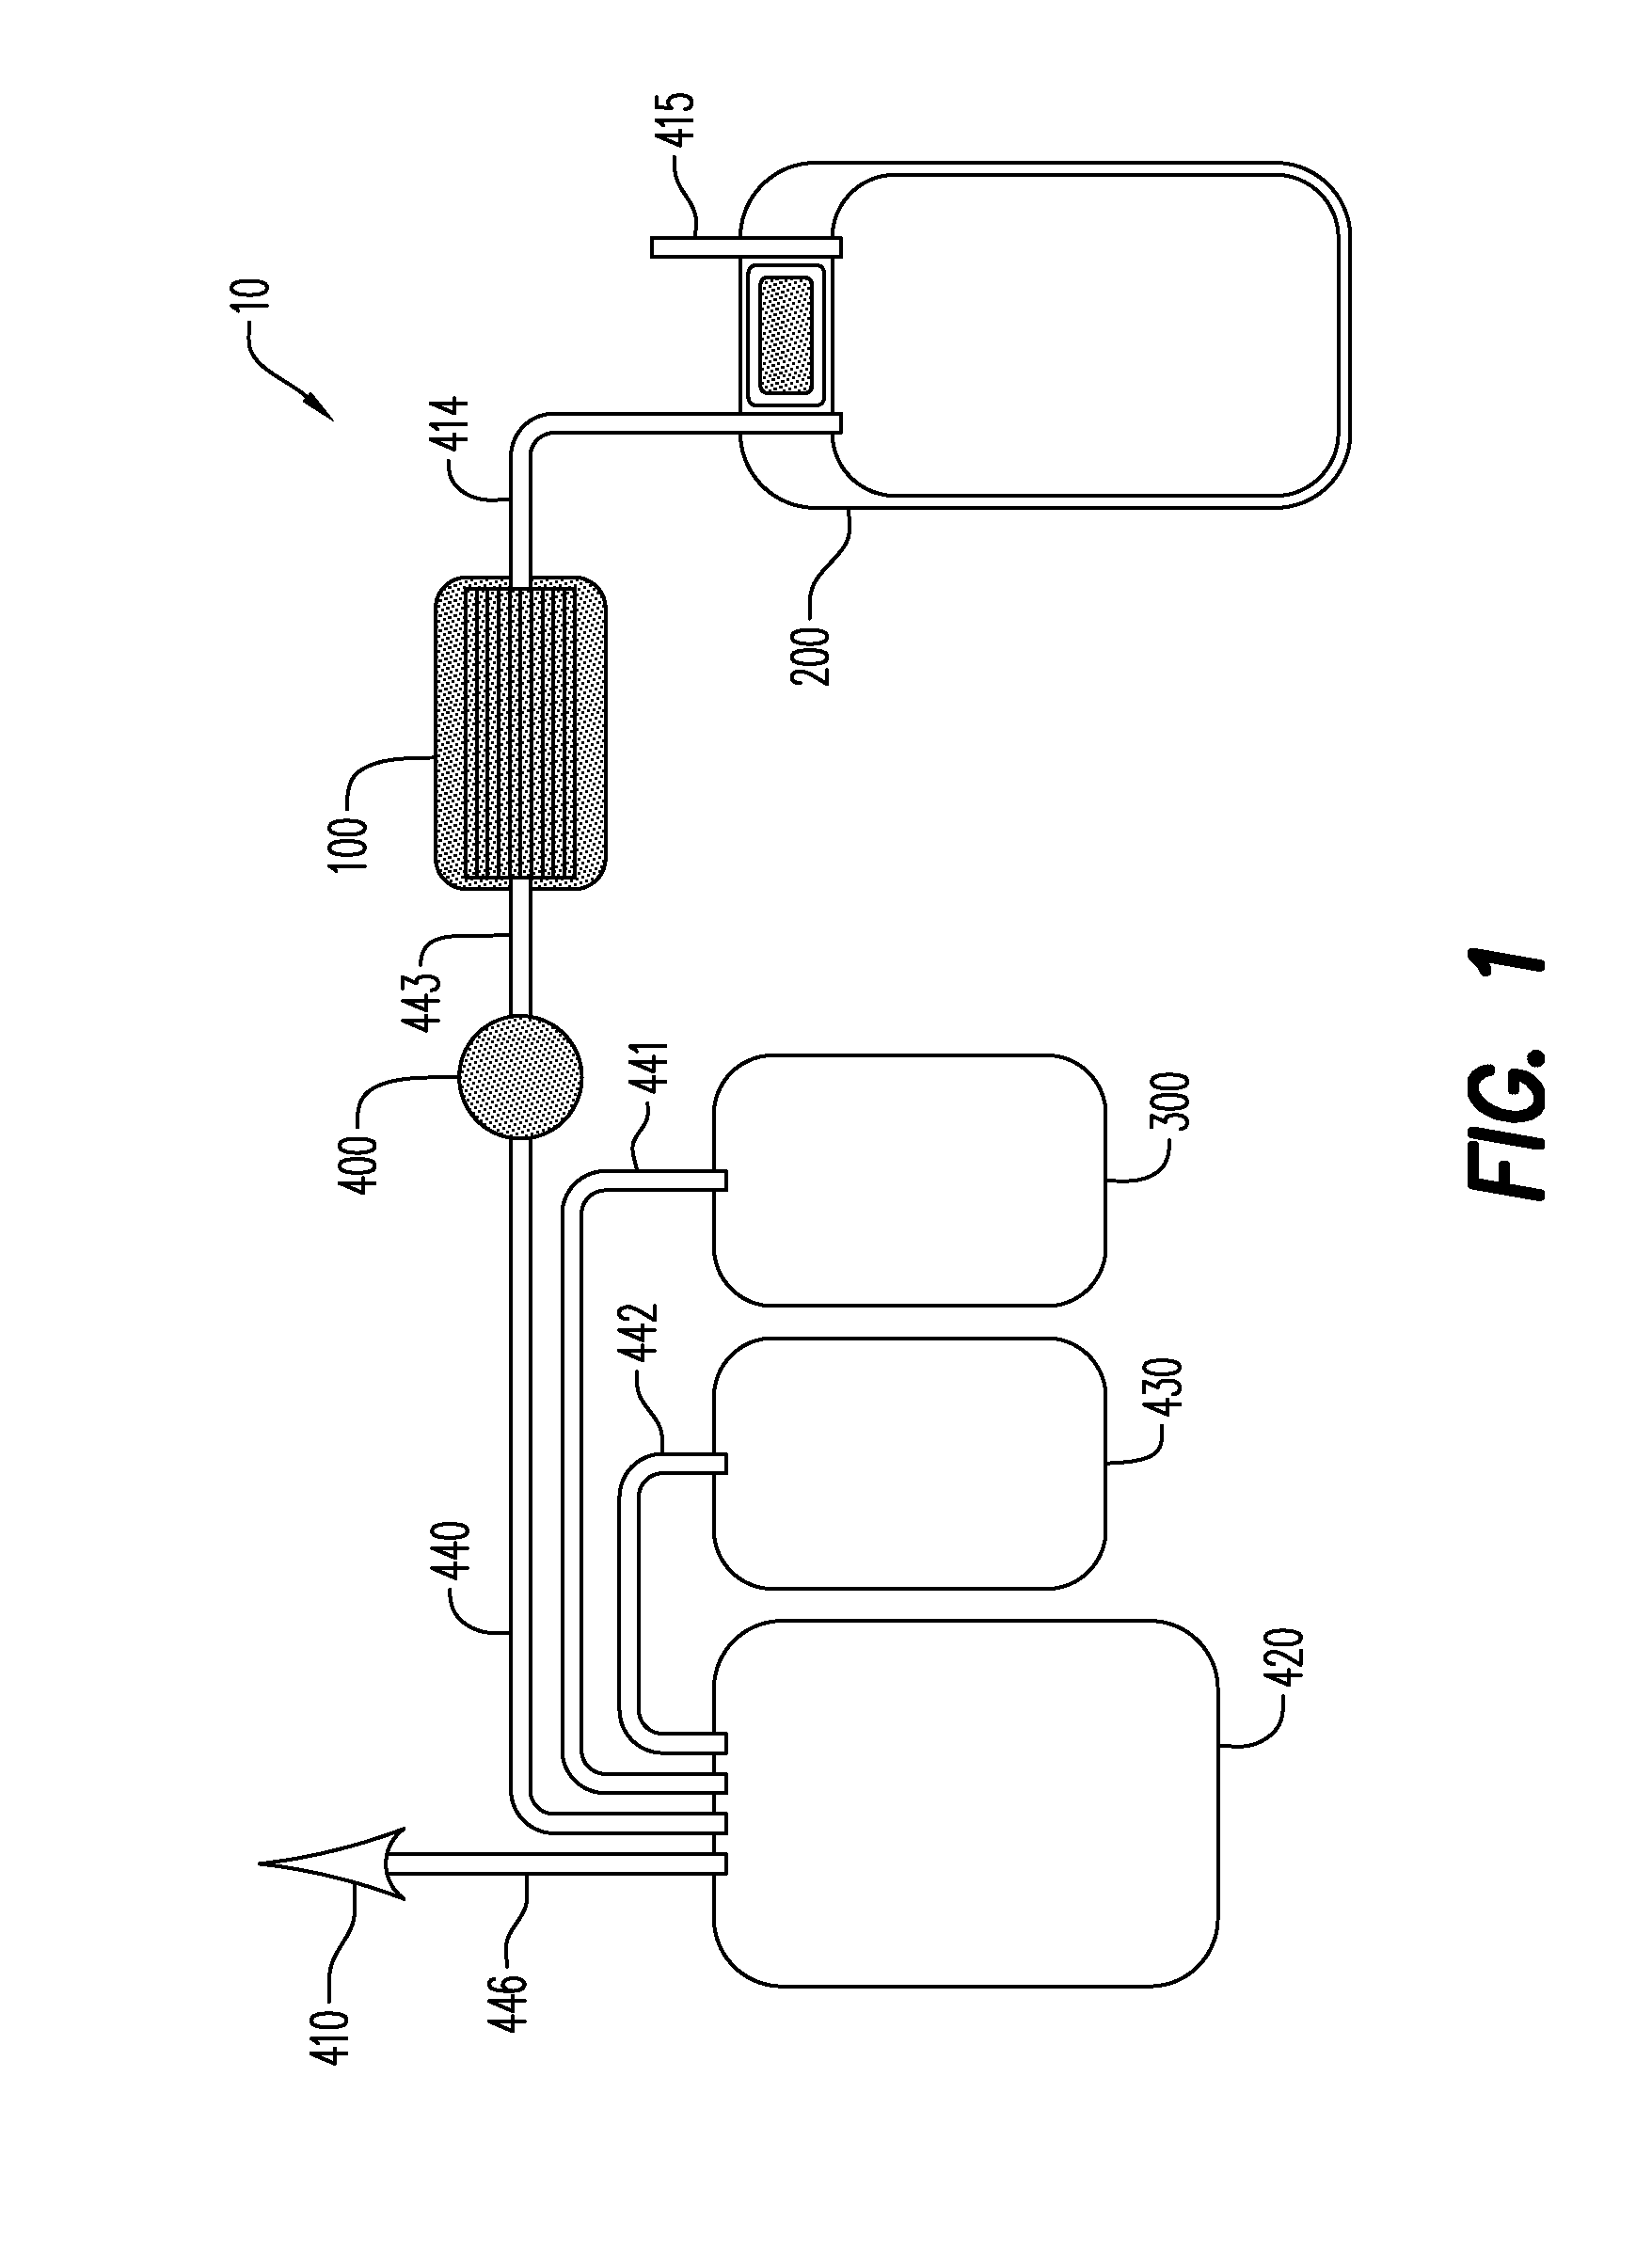 Blood storage bag system and depletion devices with oxygen and carbon dioxide depletion capabilities